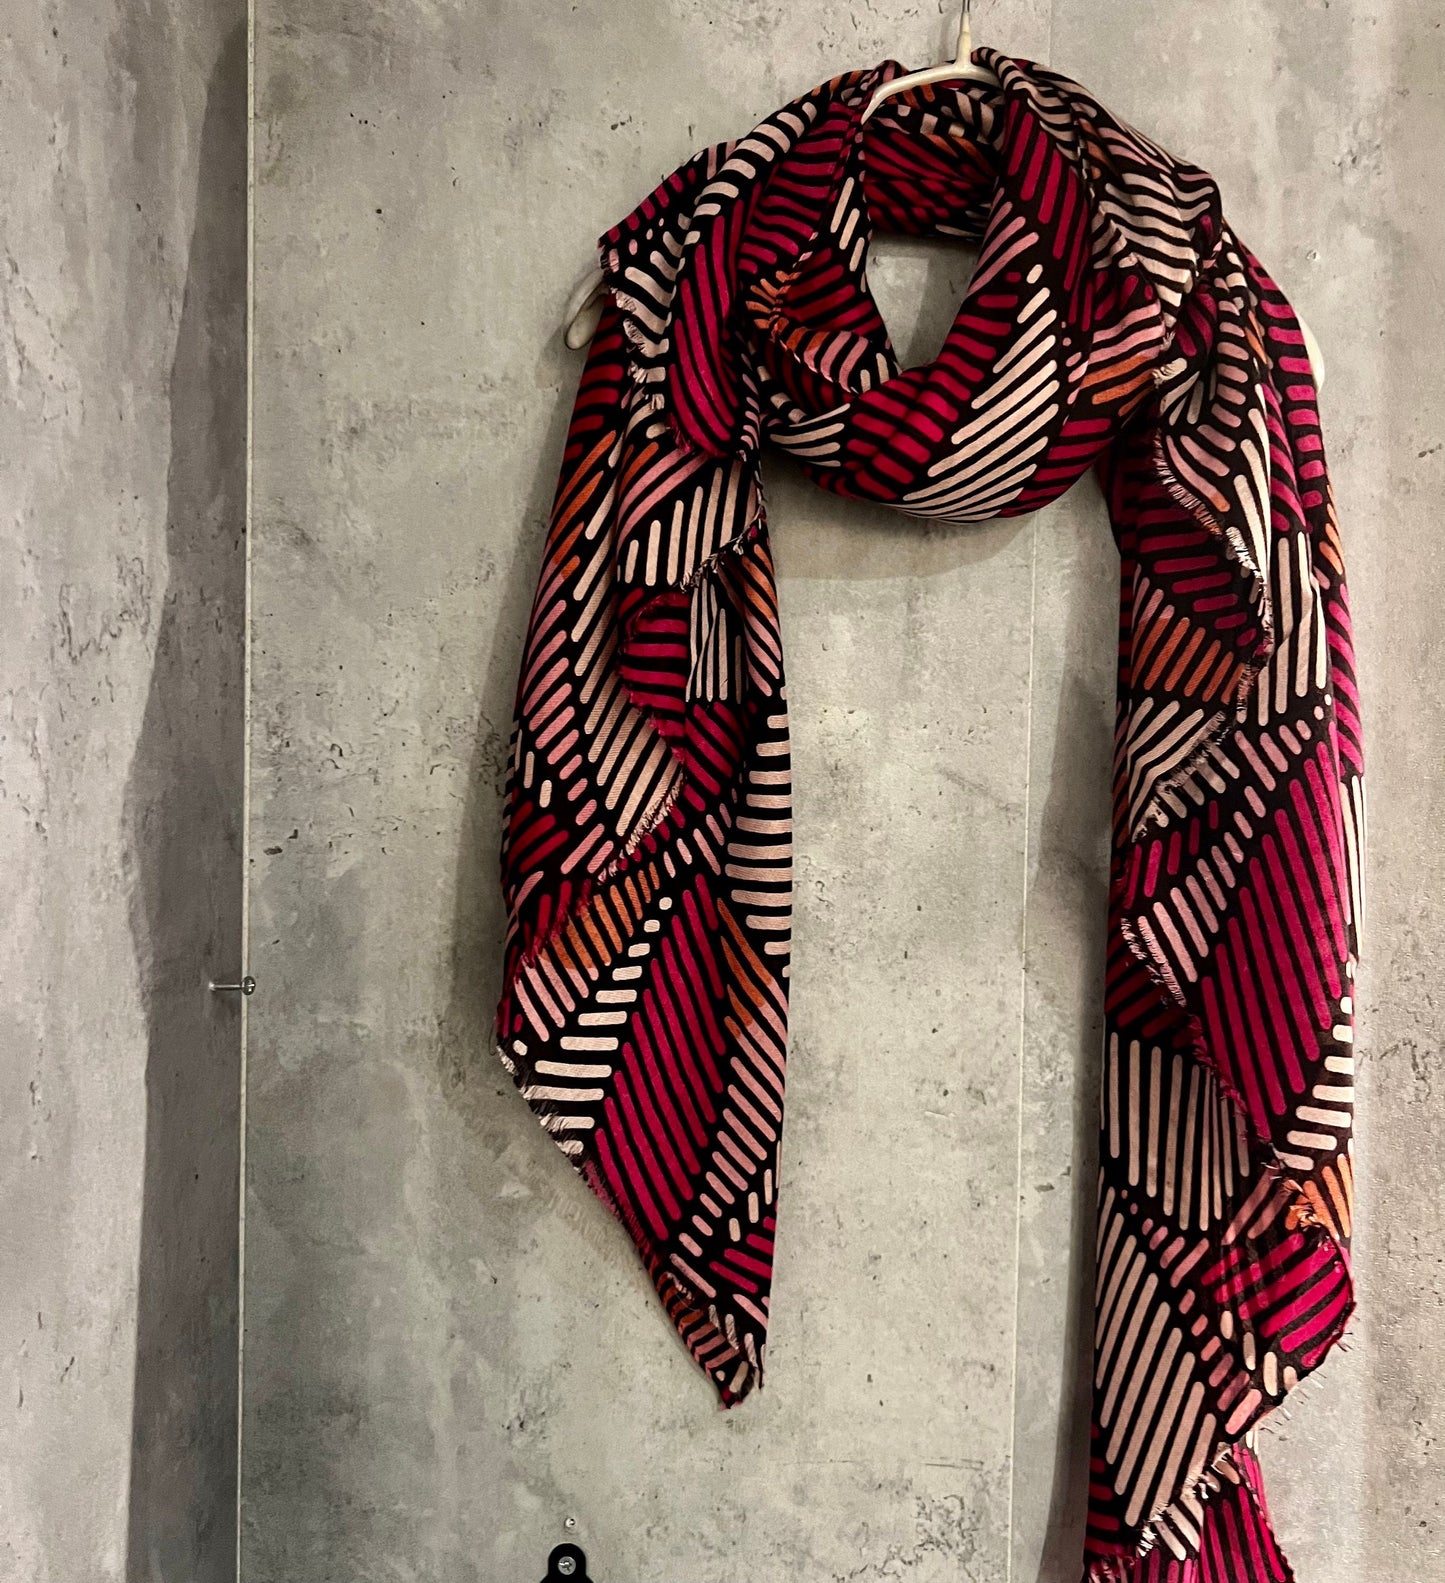 Symmetry Lines Pattern Pink Cotton Scarf/Summer Autumn Winter Scarf/Gifts For Her Birthday Christmas/Gifts For Mum/UK Seller